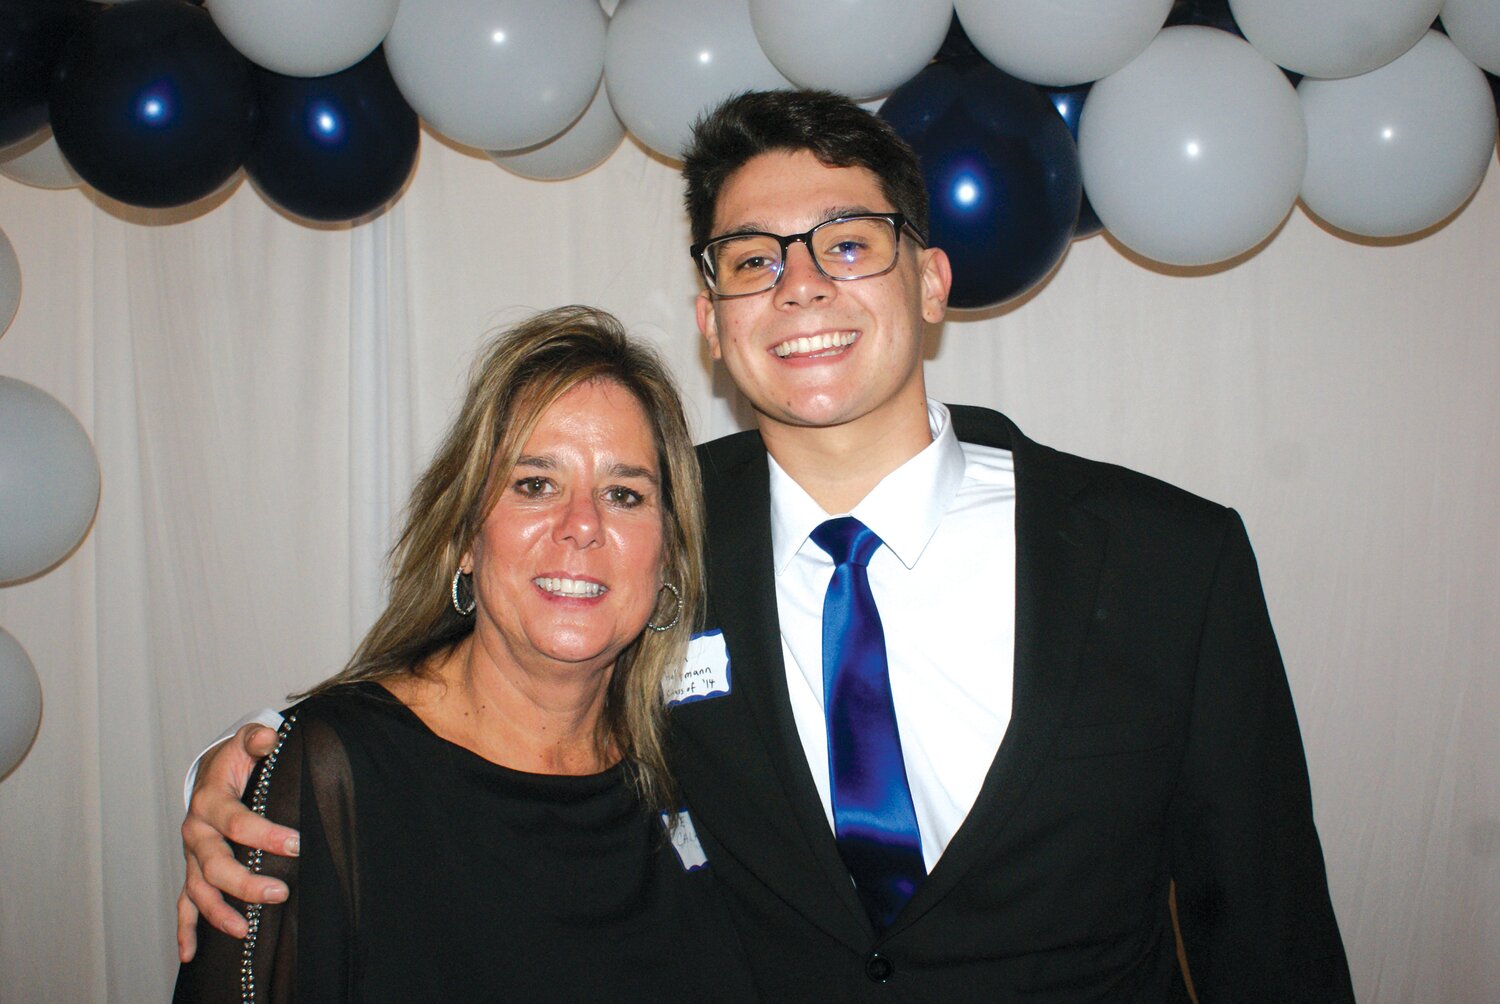 GENERATIONS: Mother Sue Calkins-Hoffmann, class of ‘78, and her son Jared Hoffmann, class of ’14, smile with pride as they celebrate the school that helped both of them prepare for adulthood. -